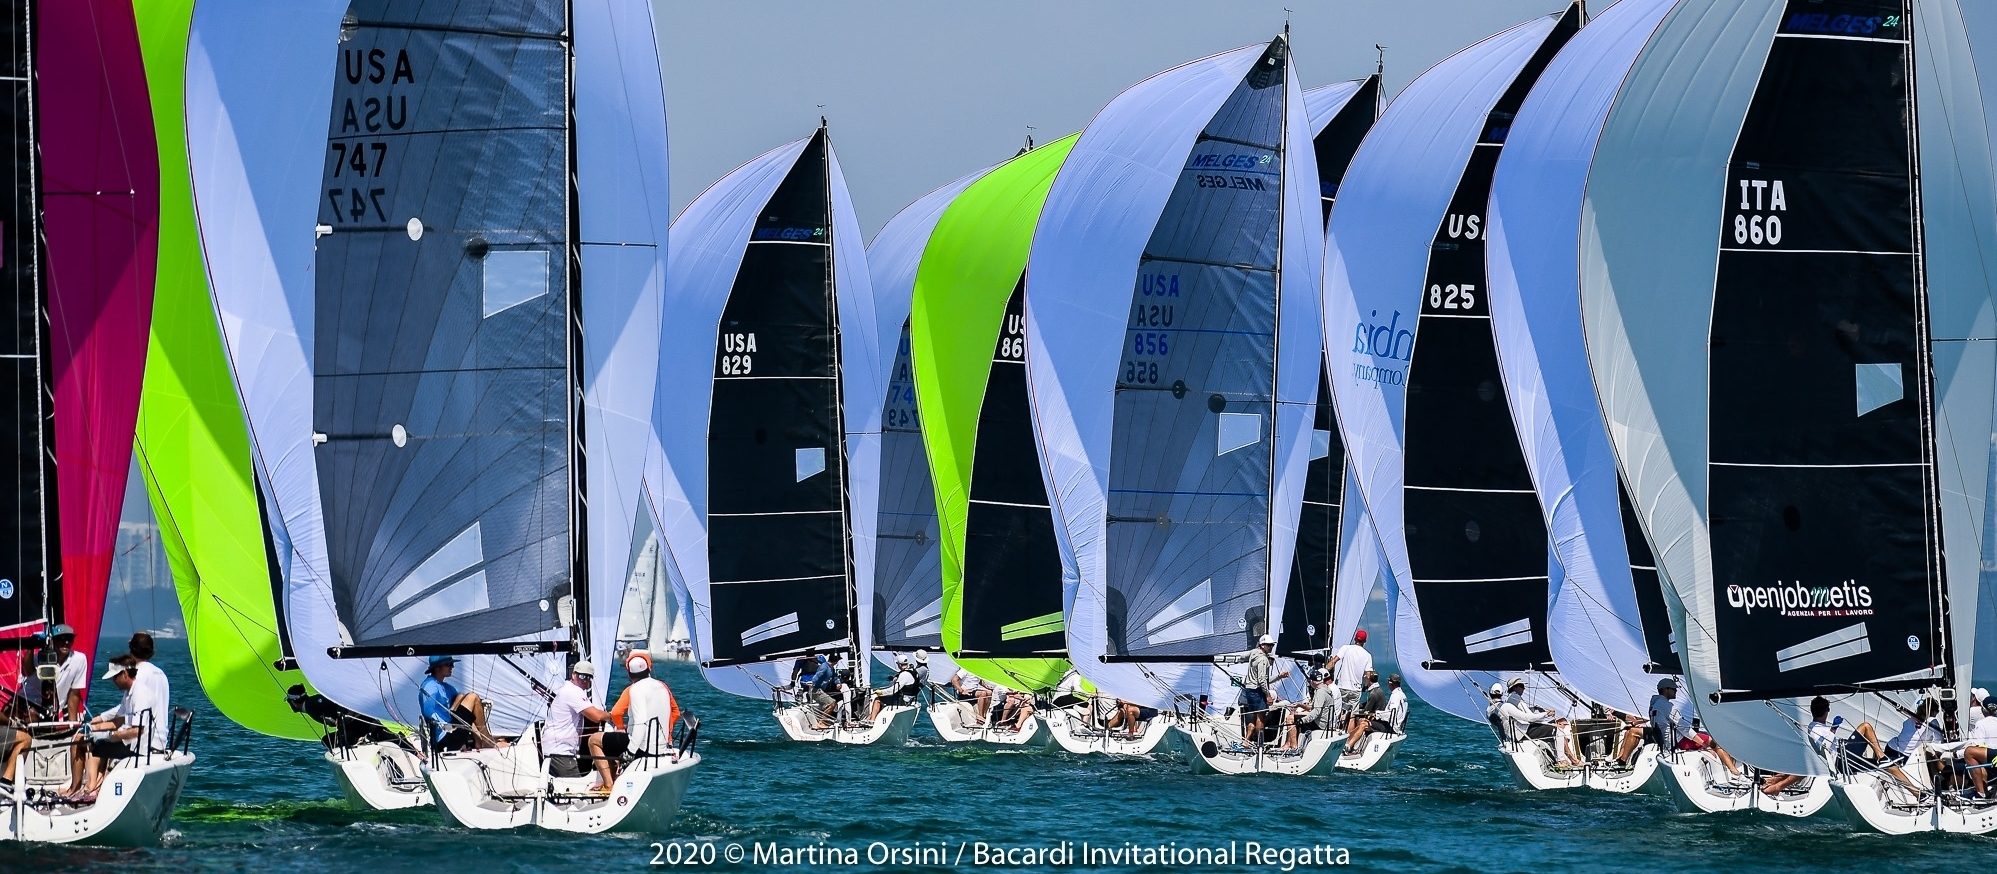  J/70, Melges 24, Viper640, Windfoil  Bacardi Invitational Regatta  Miami FL, USA  Day 3, clear leaders in most classes before the last races today